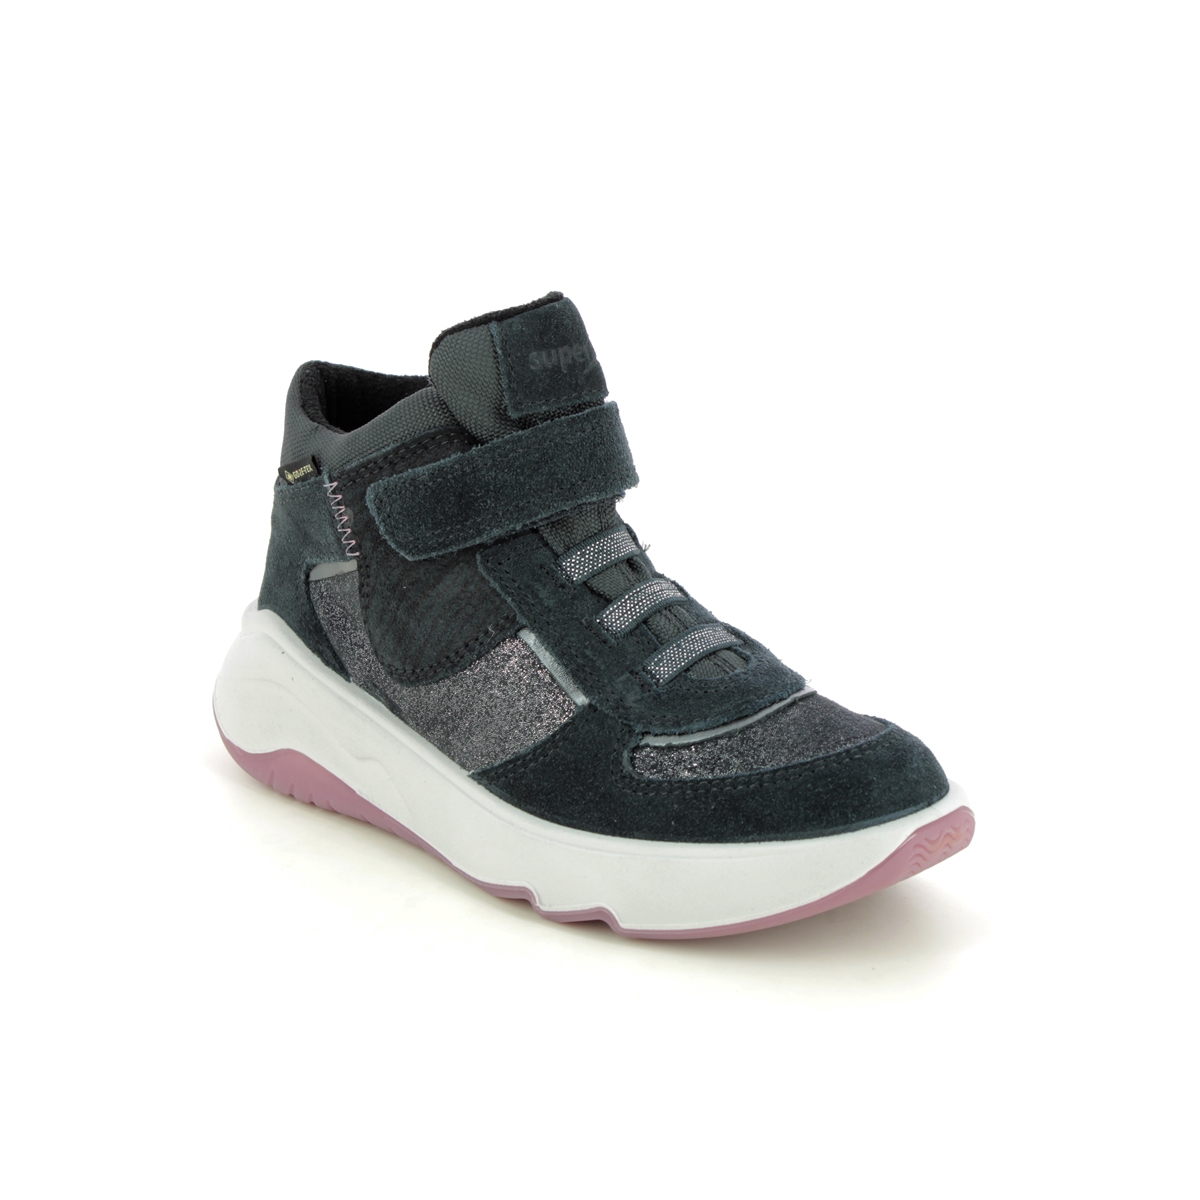 Superfit Melodie Ht Gtx Black Suede Kids girls trainers 1000632-2000 in a Plain Leather and Man-made in Size 31